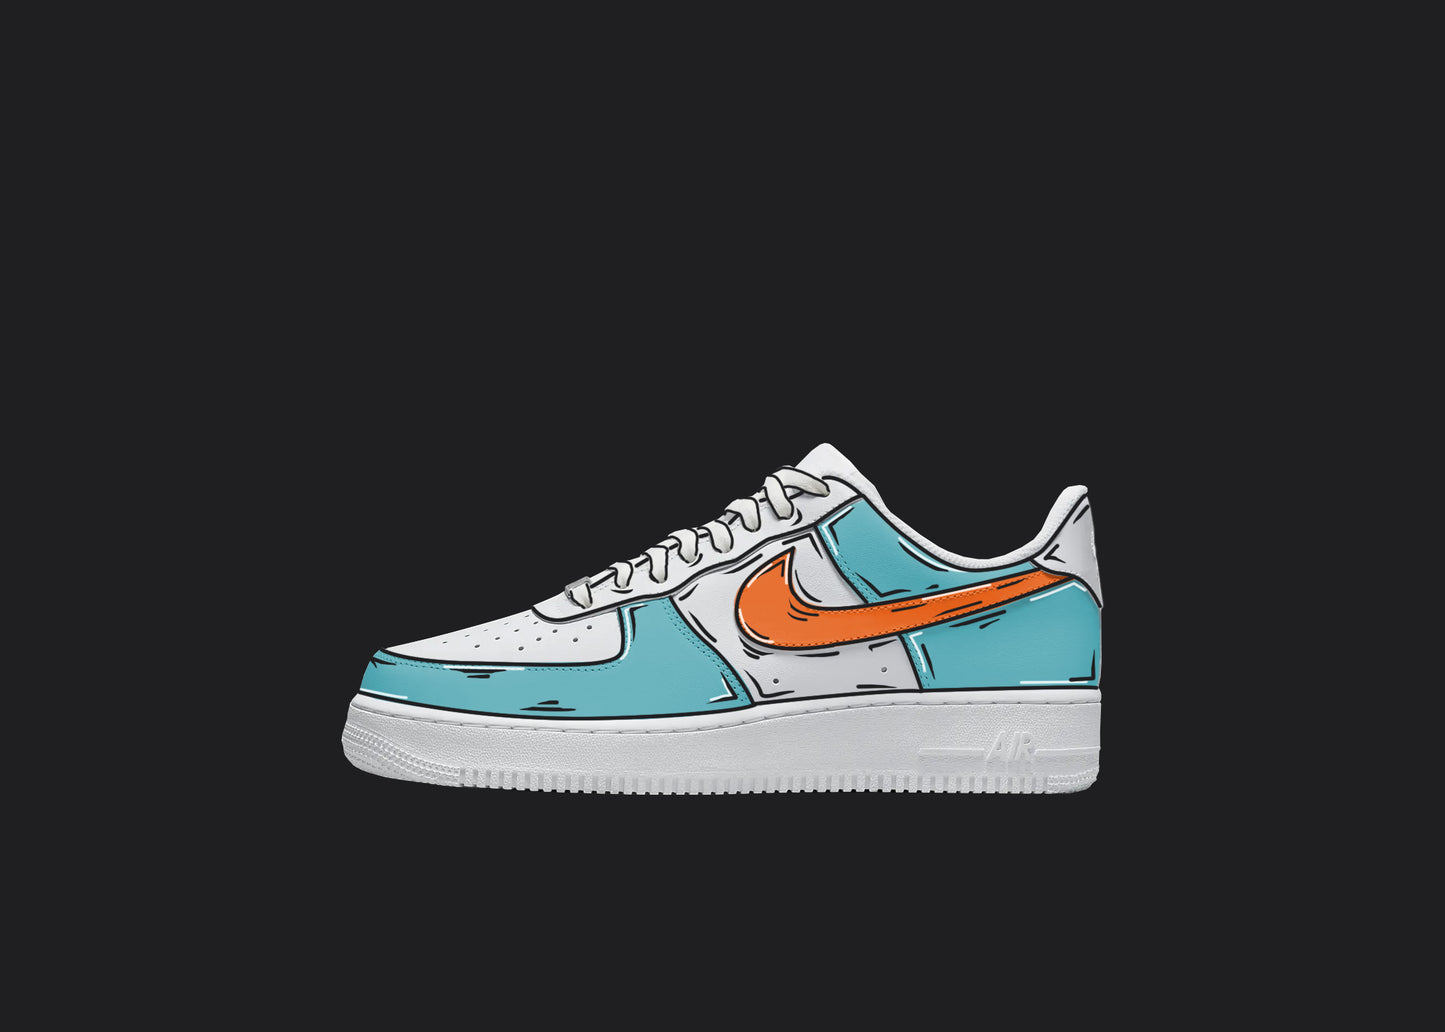 Custom Air Force 1 sneakers with light blue panels and orange Nike swoosh, featuring hand-painted cartoon outlines